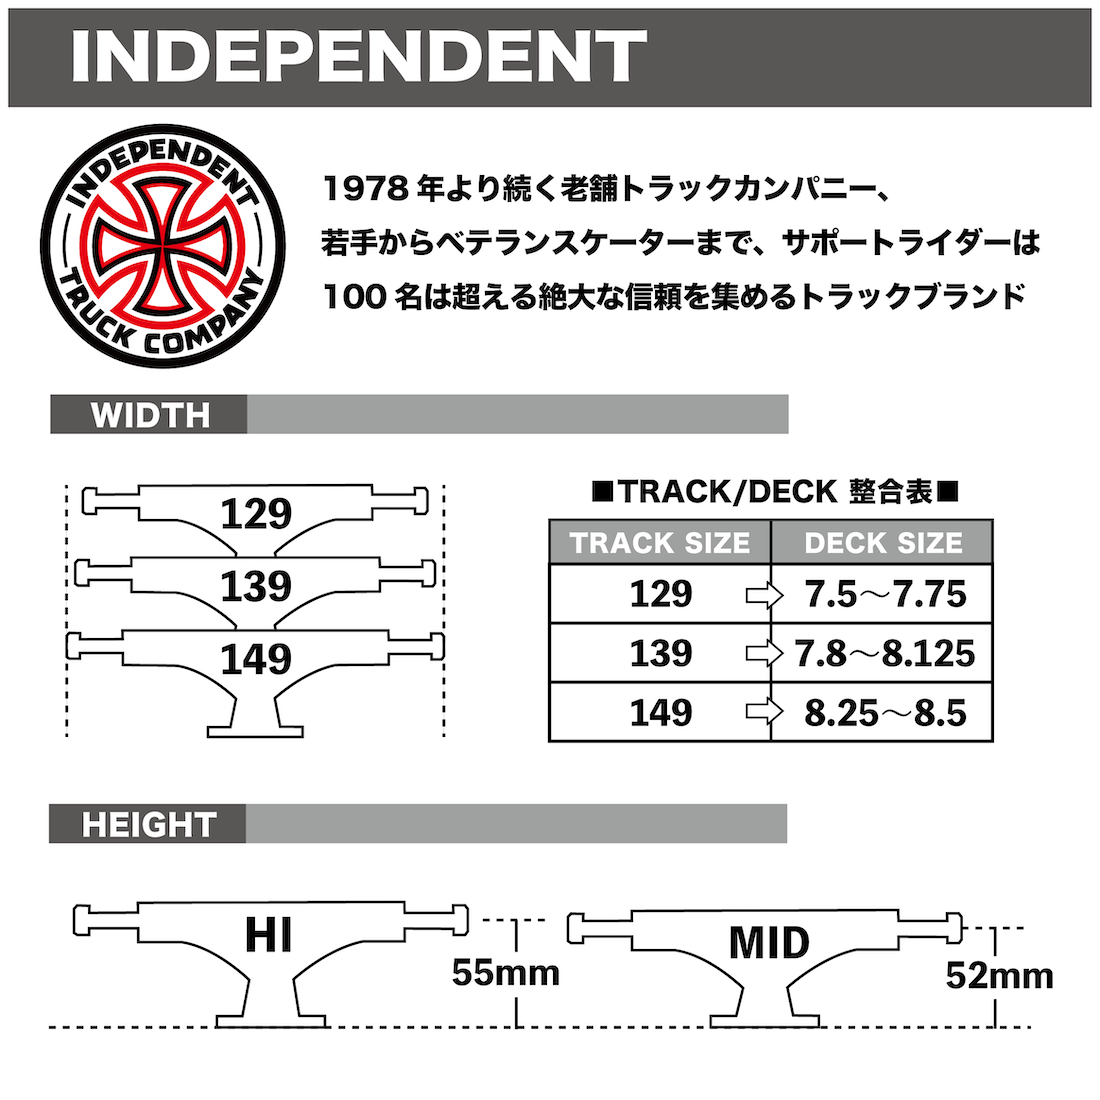 【INDEPENDENT】 Forged Hollow Standard - 129